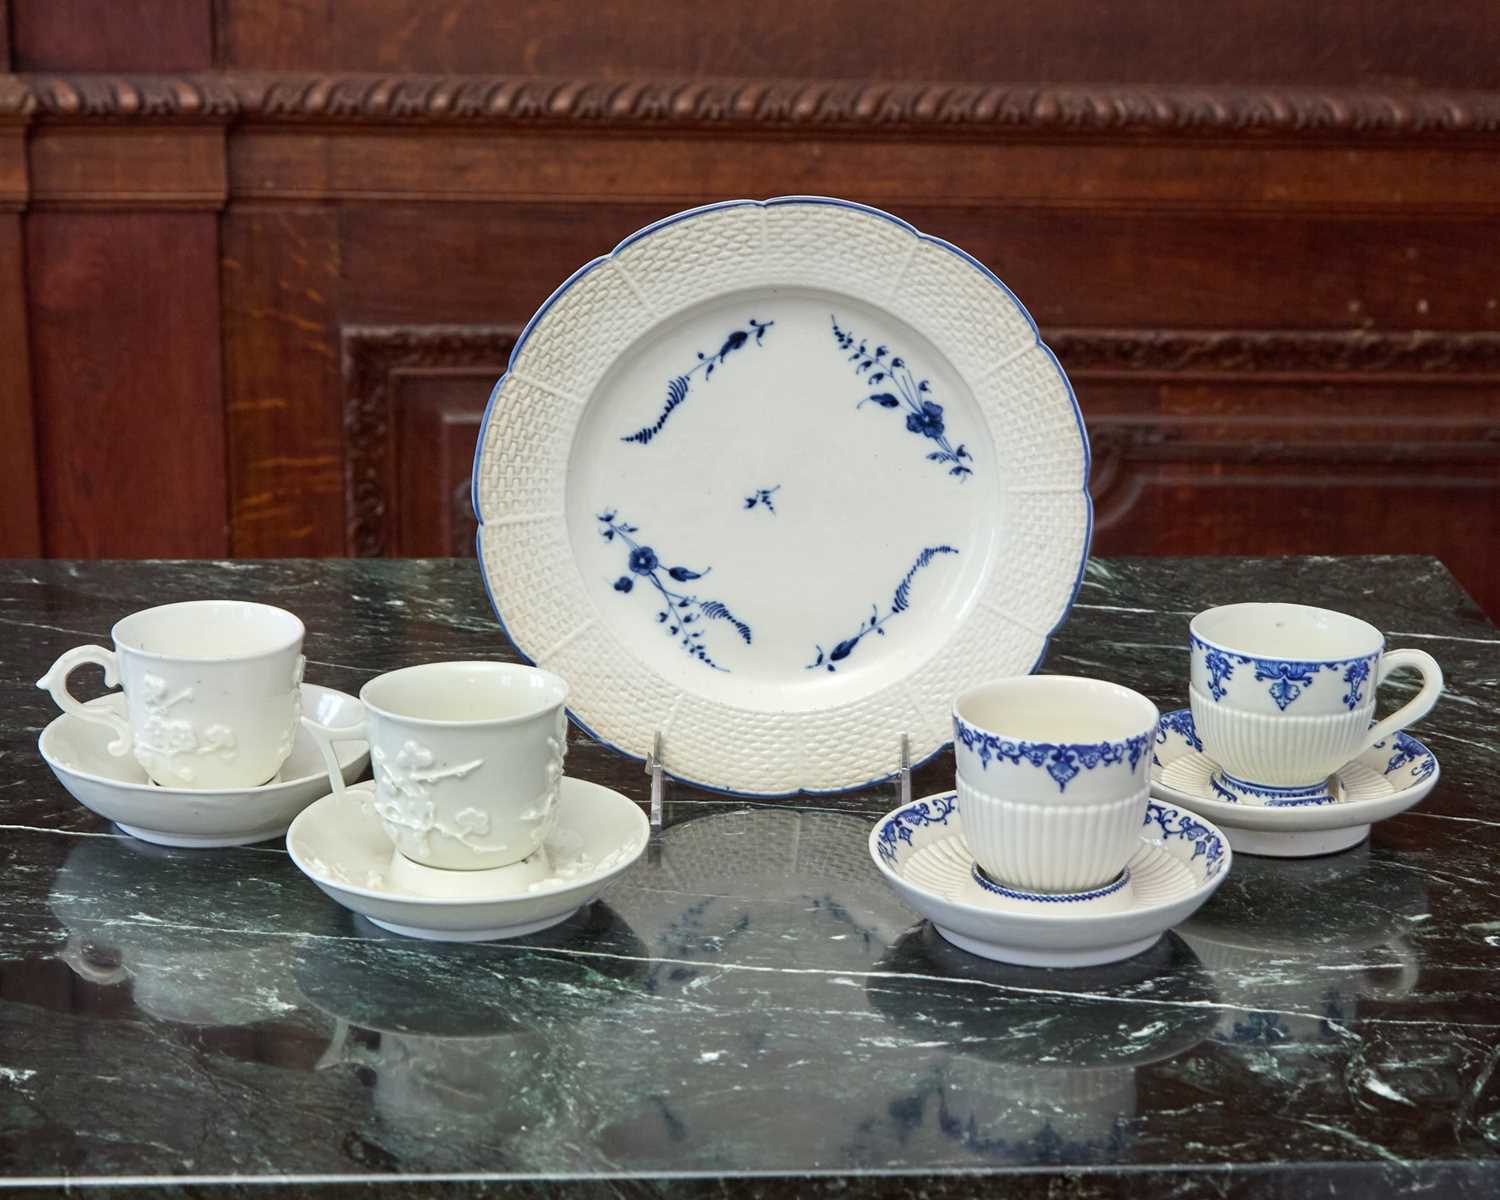 Lot 428 - FOUR SAINT CLOUD PORCELAIN TREMBLEUSE CUPS AND SAUCERS AND A CHANTILLY BLUE AND WHITE PLATE